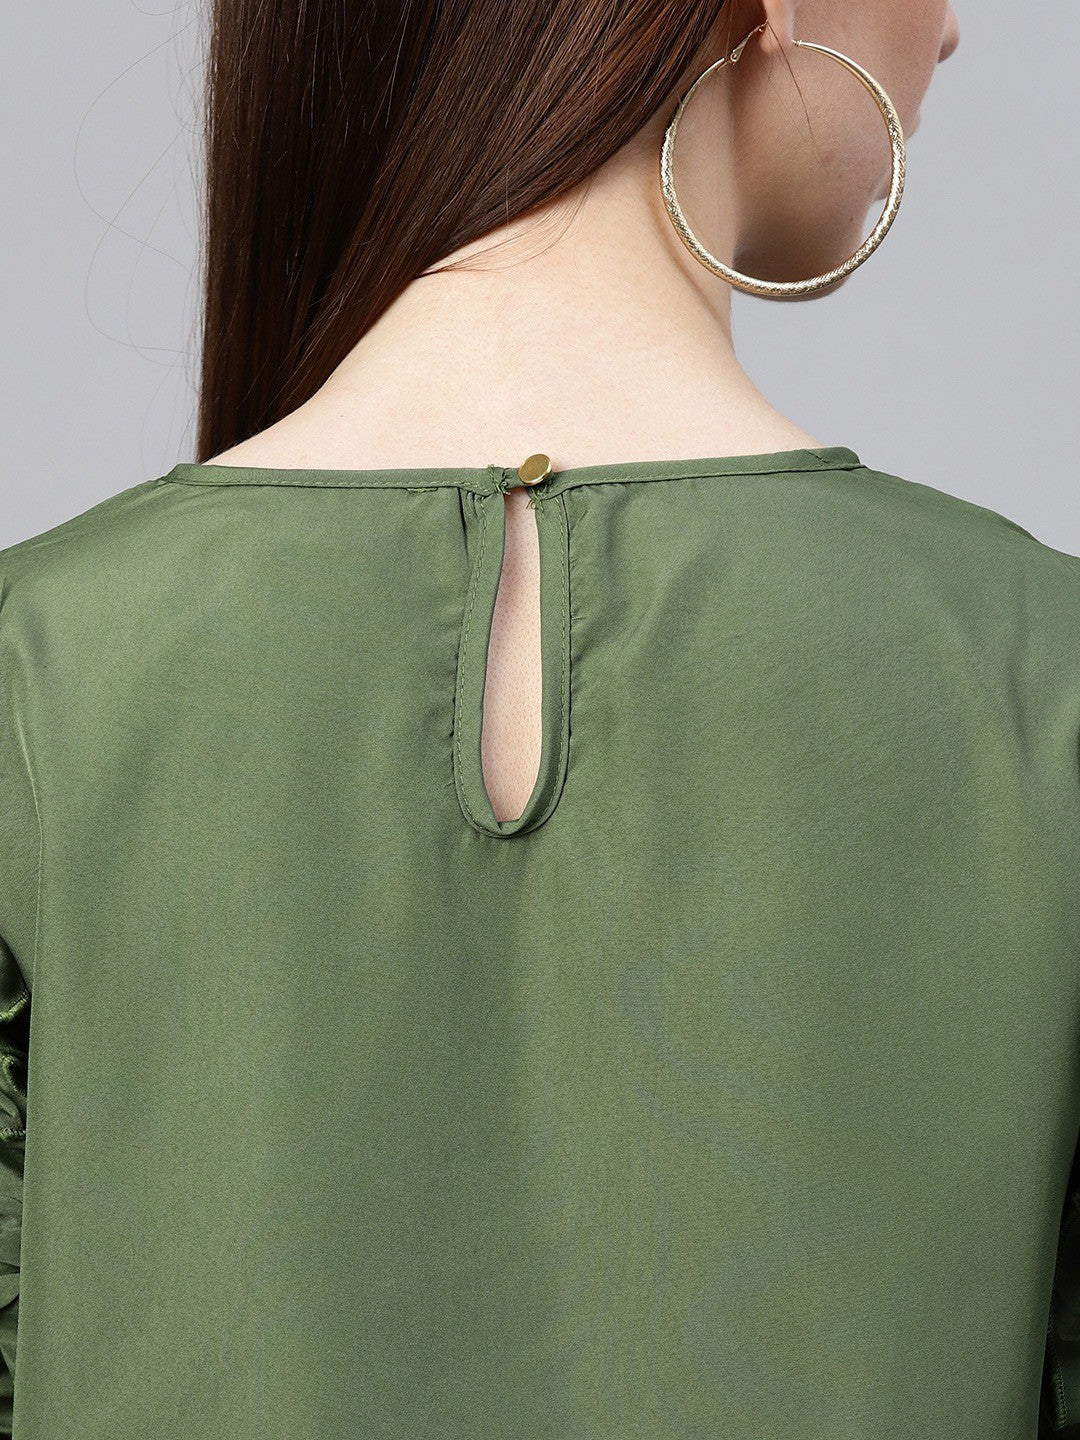 Olive Green Solid Top